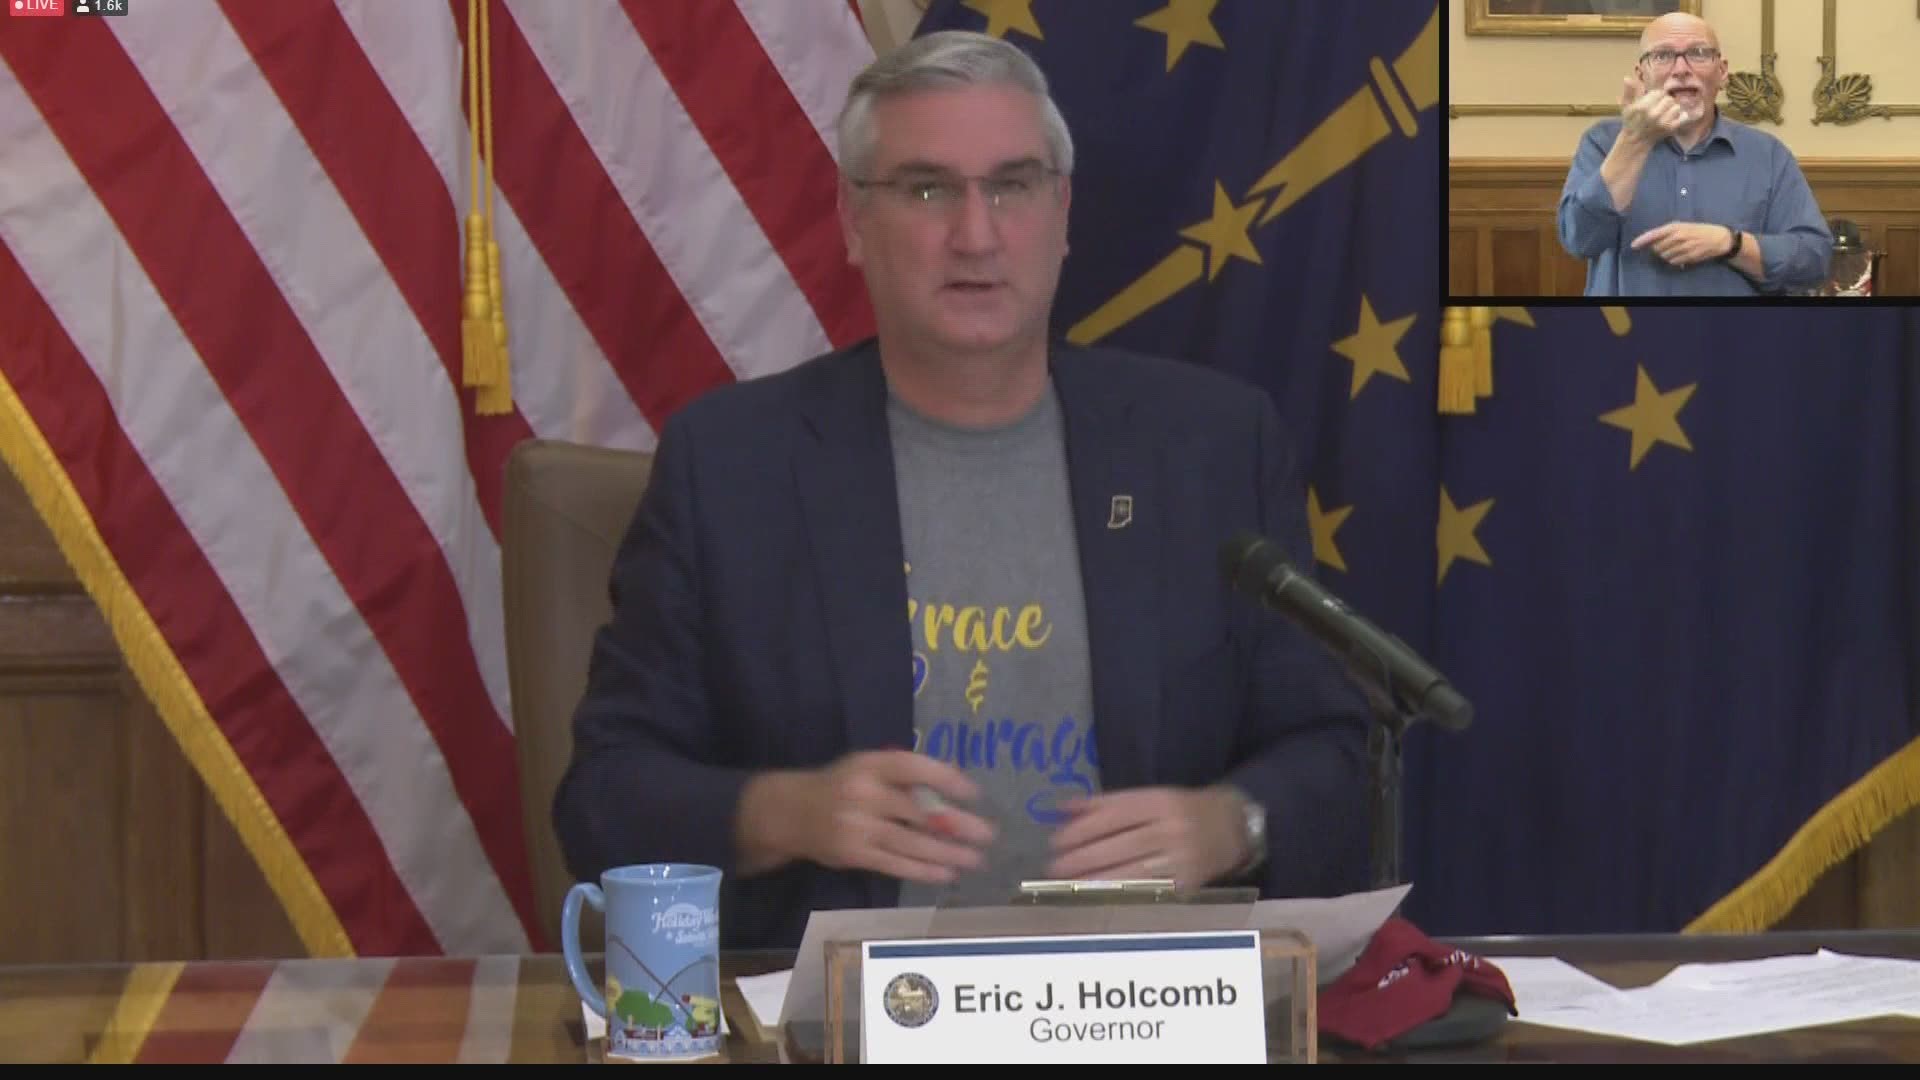 During today's briefing, Governor Holcomb appeared to shoot down the idea of mail-in voting in Indiana.